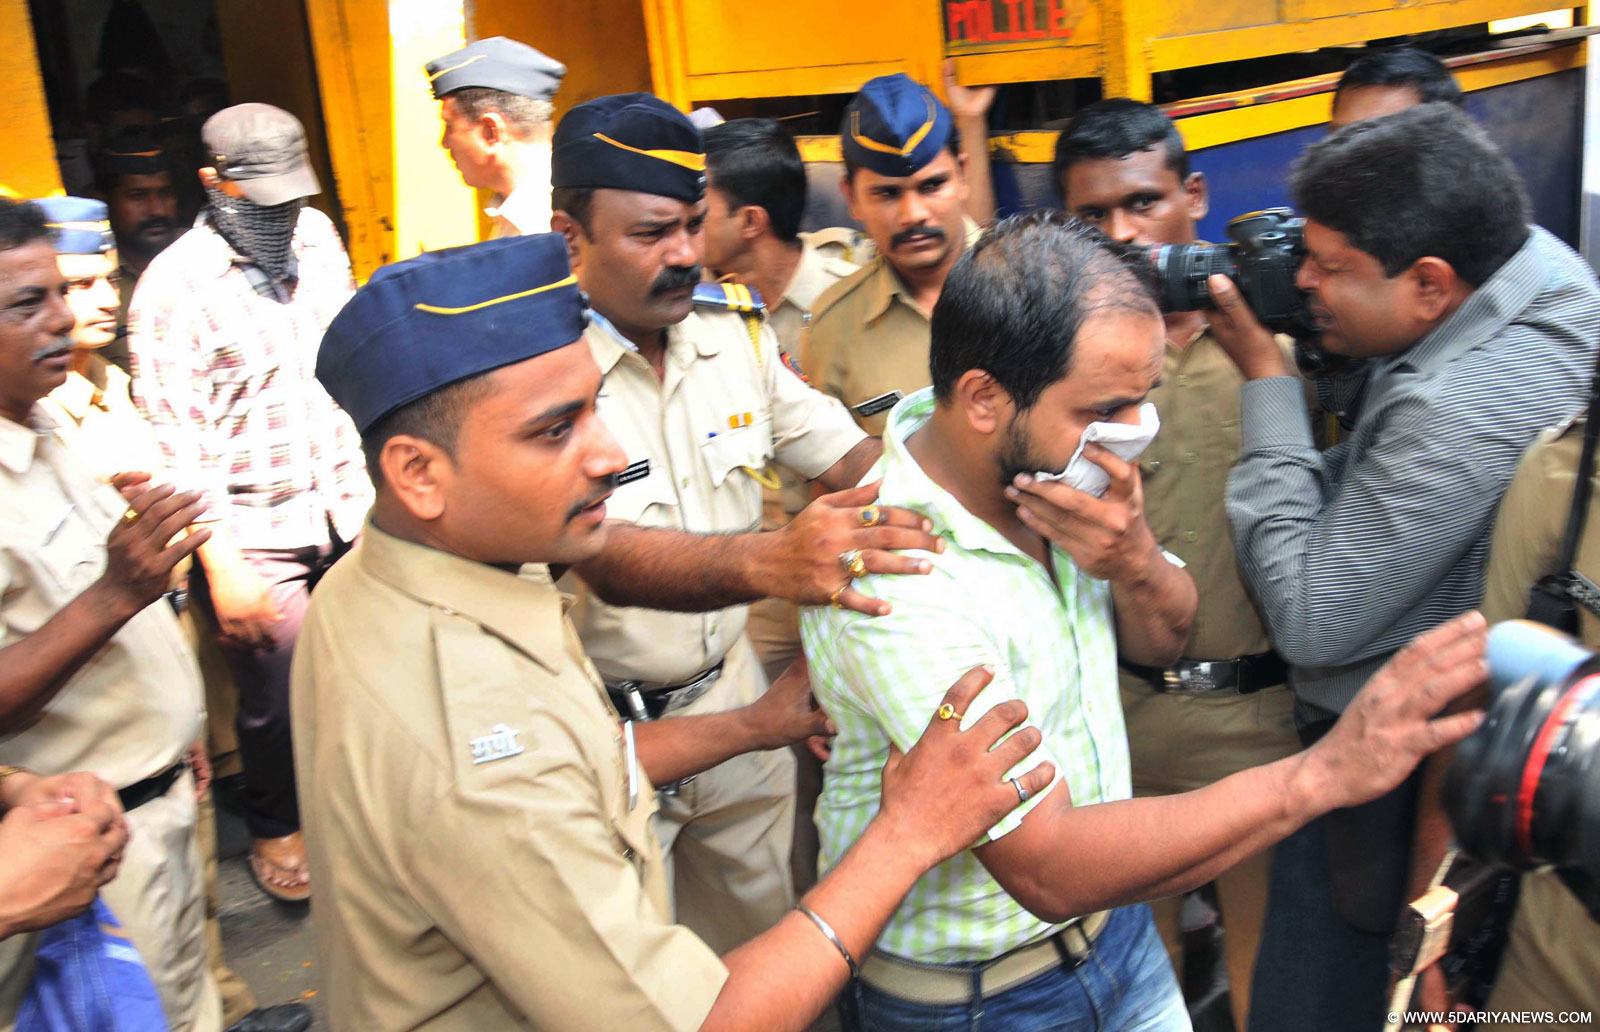 An accused in the 2006 Mumbai serial bomb blasts case at the MCOCA (Maharashtra Control of Organised Crime Act) court in Mumbai, on Sep 30, 2015. The court awarded the death penalty to five and life in prison to seven others, all convicted in the 7/11 serial blasts on the city